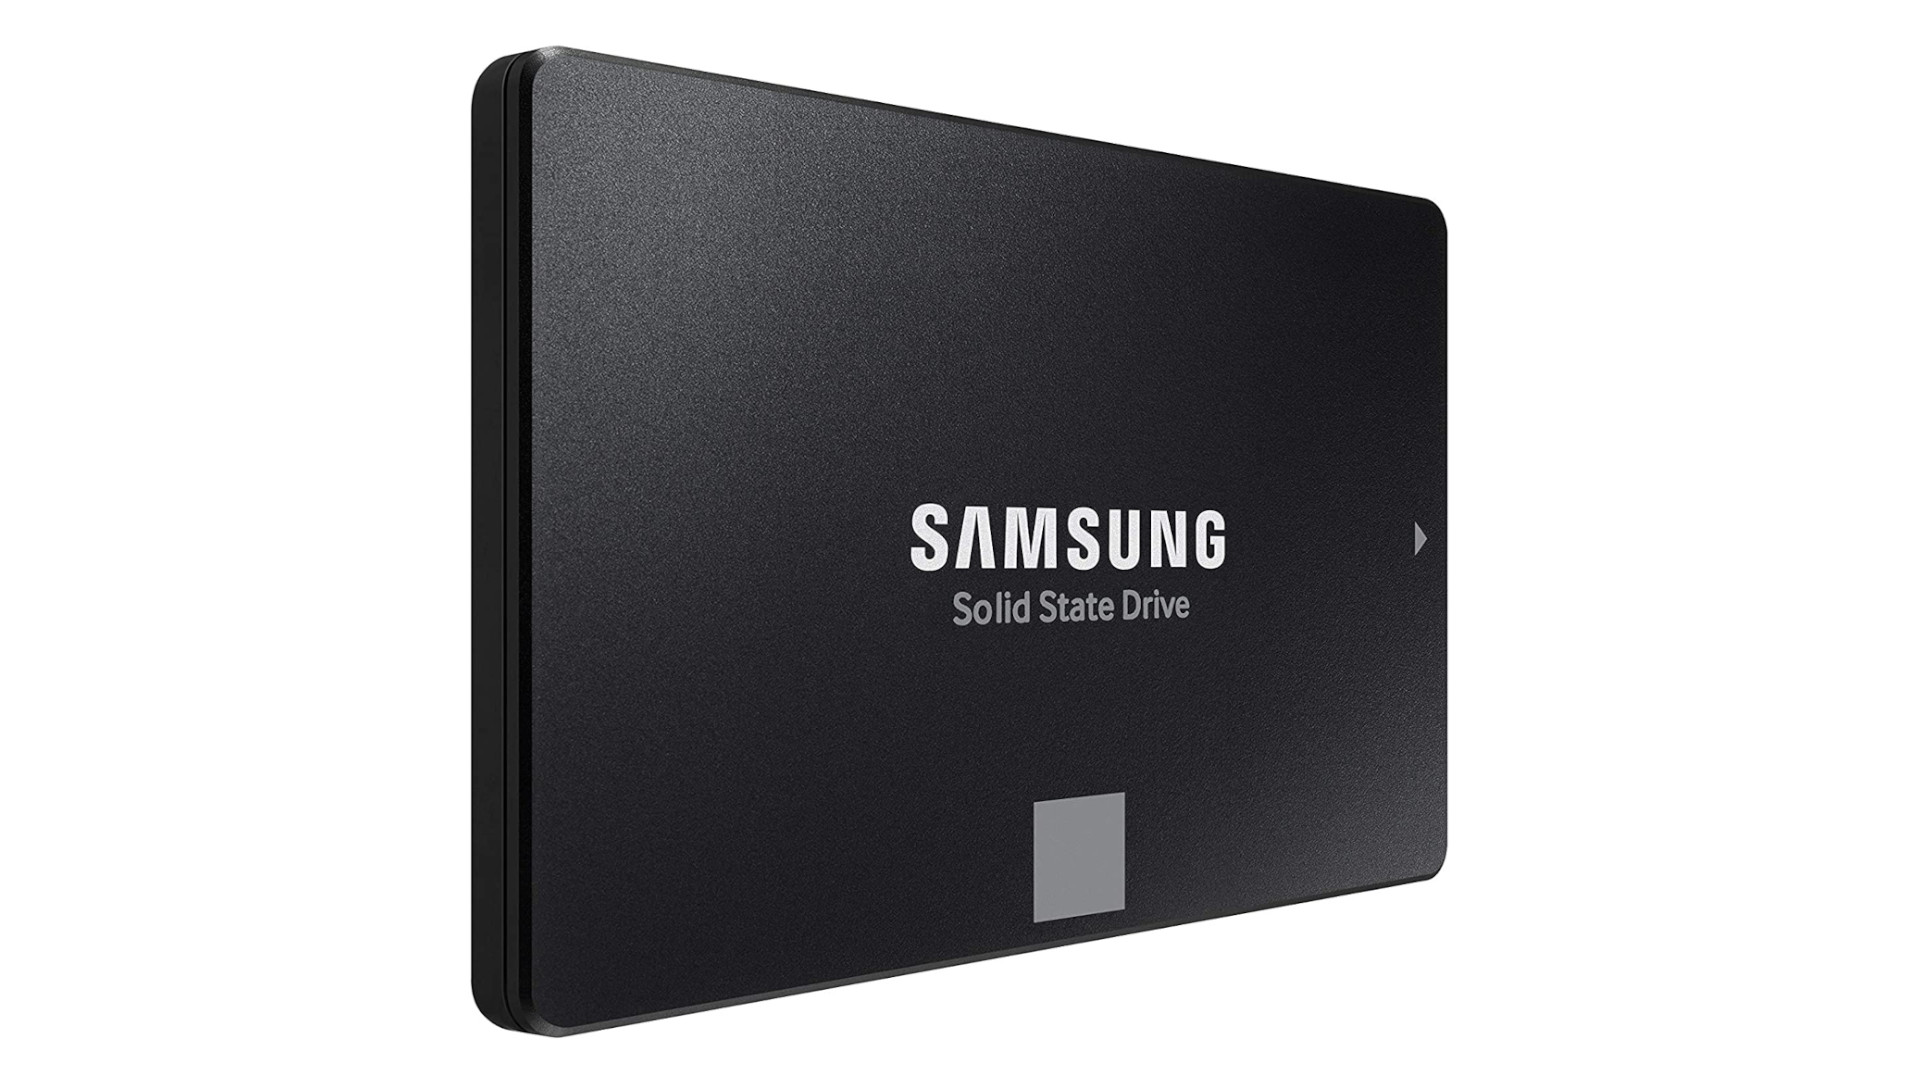 The Samsung 870 Evo is the best SATA SSD, and sits against a white background